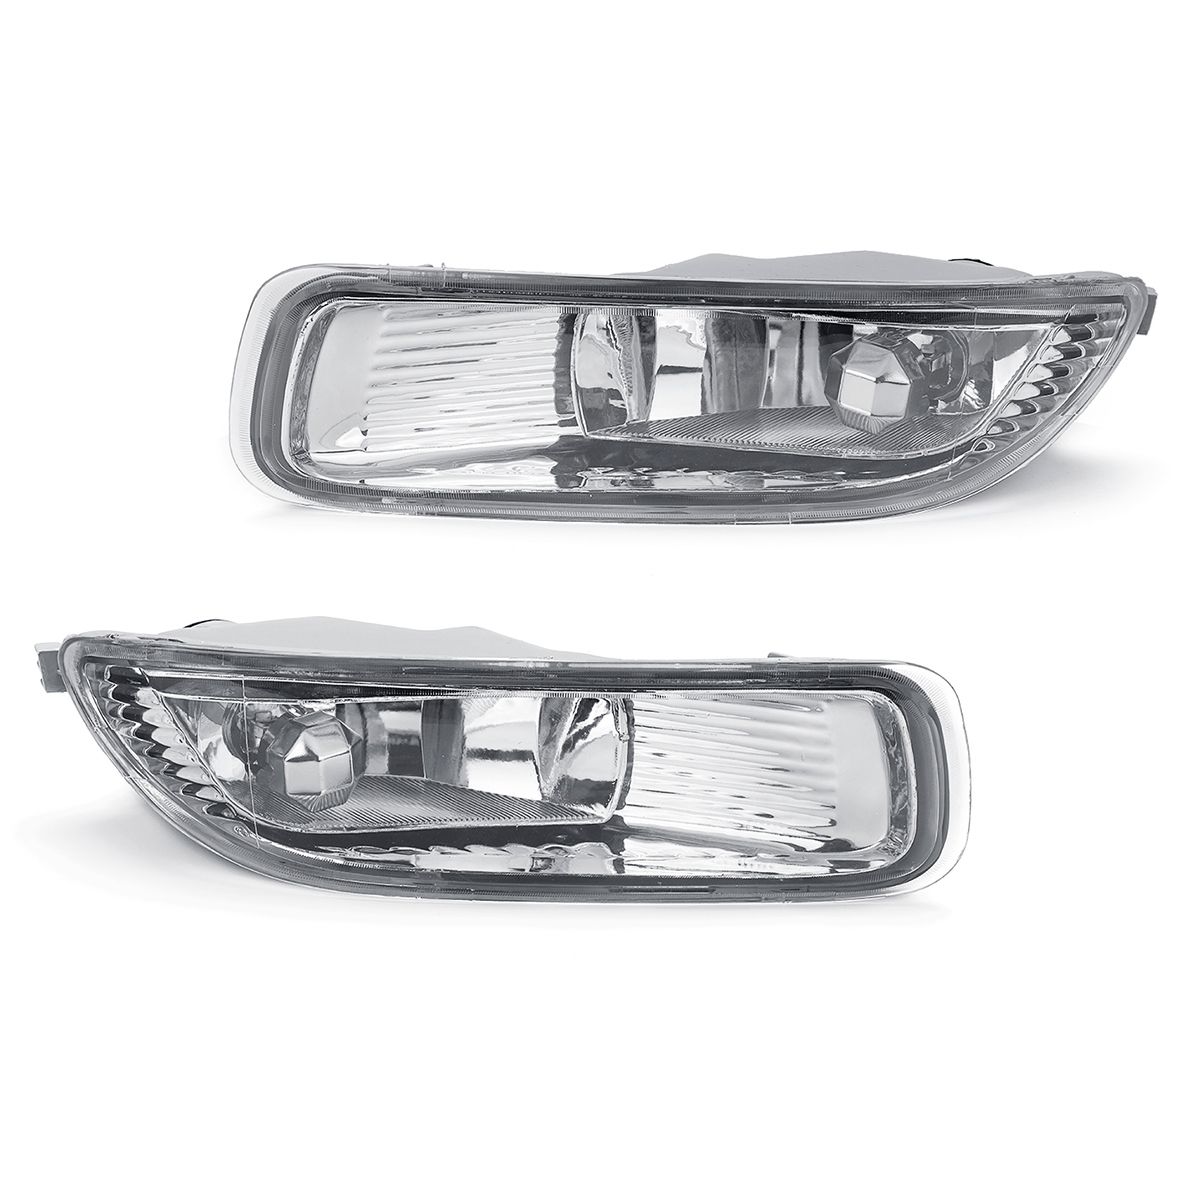 Car-Front-Bumper-Driving-Fog-Lights-Lamps-Clear-Lens-with-Bulb-Amber-for-Toyota-Corolla-2003-2004-81-1460716